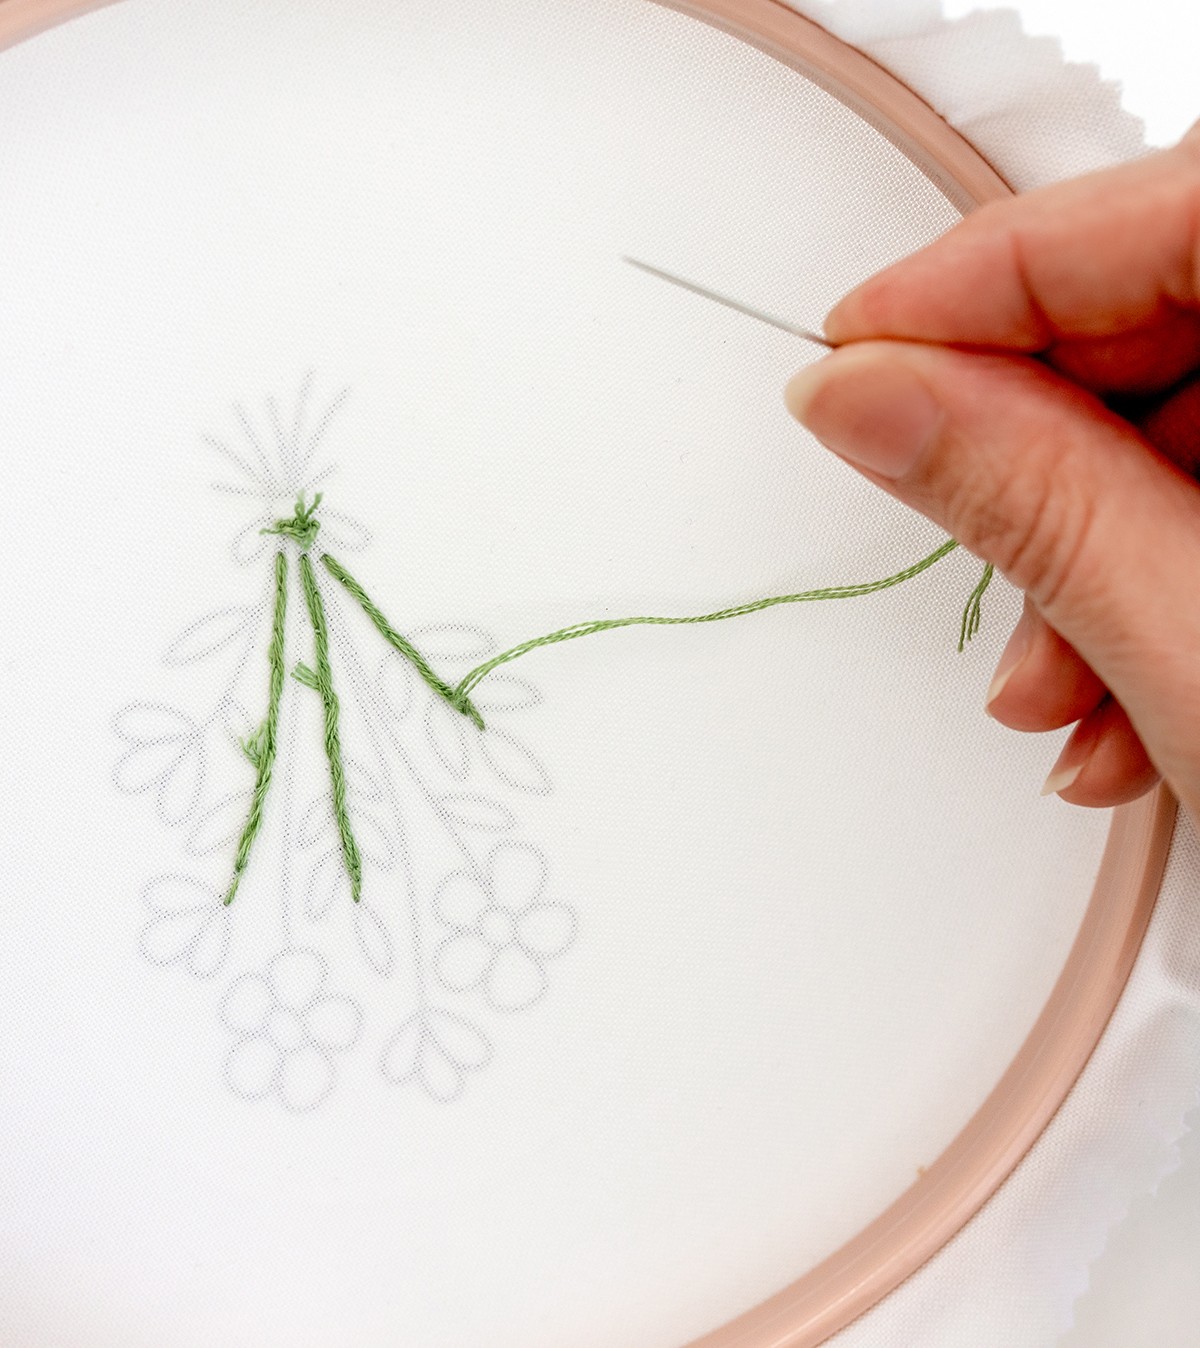 A needle is held away from an embroidered hoop.